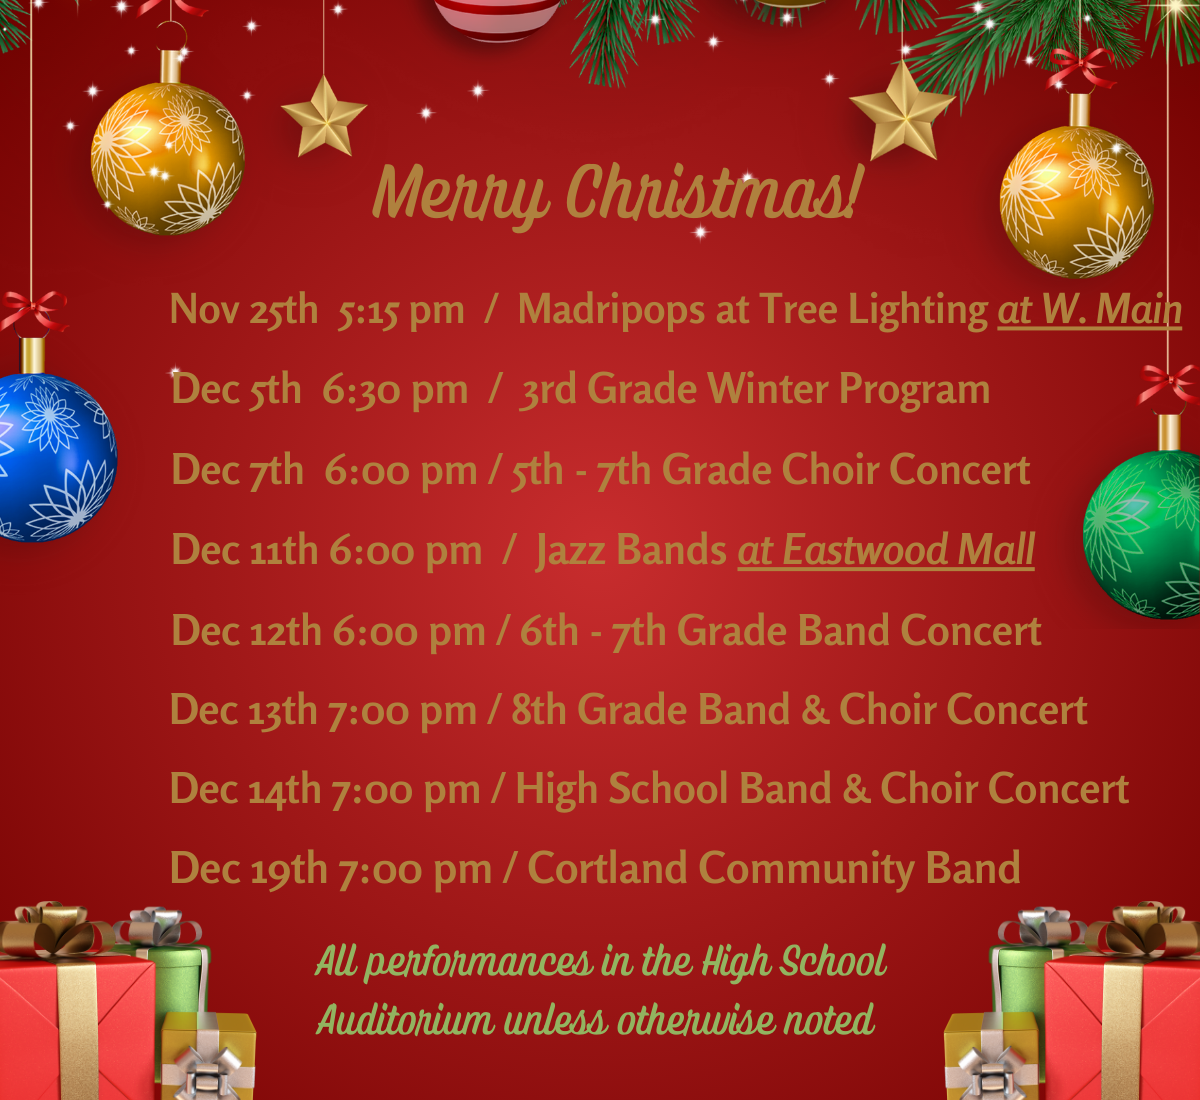 Schedule of Musical Performances